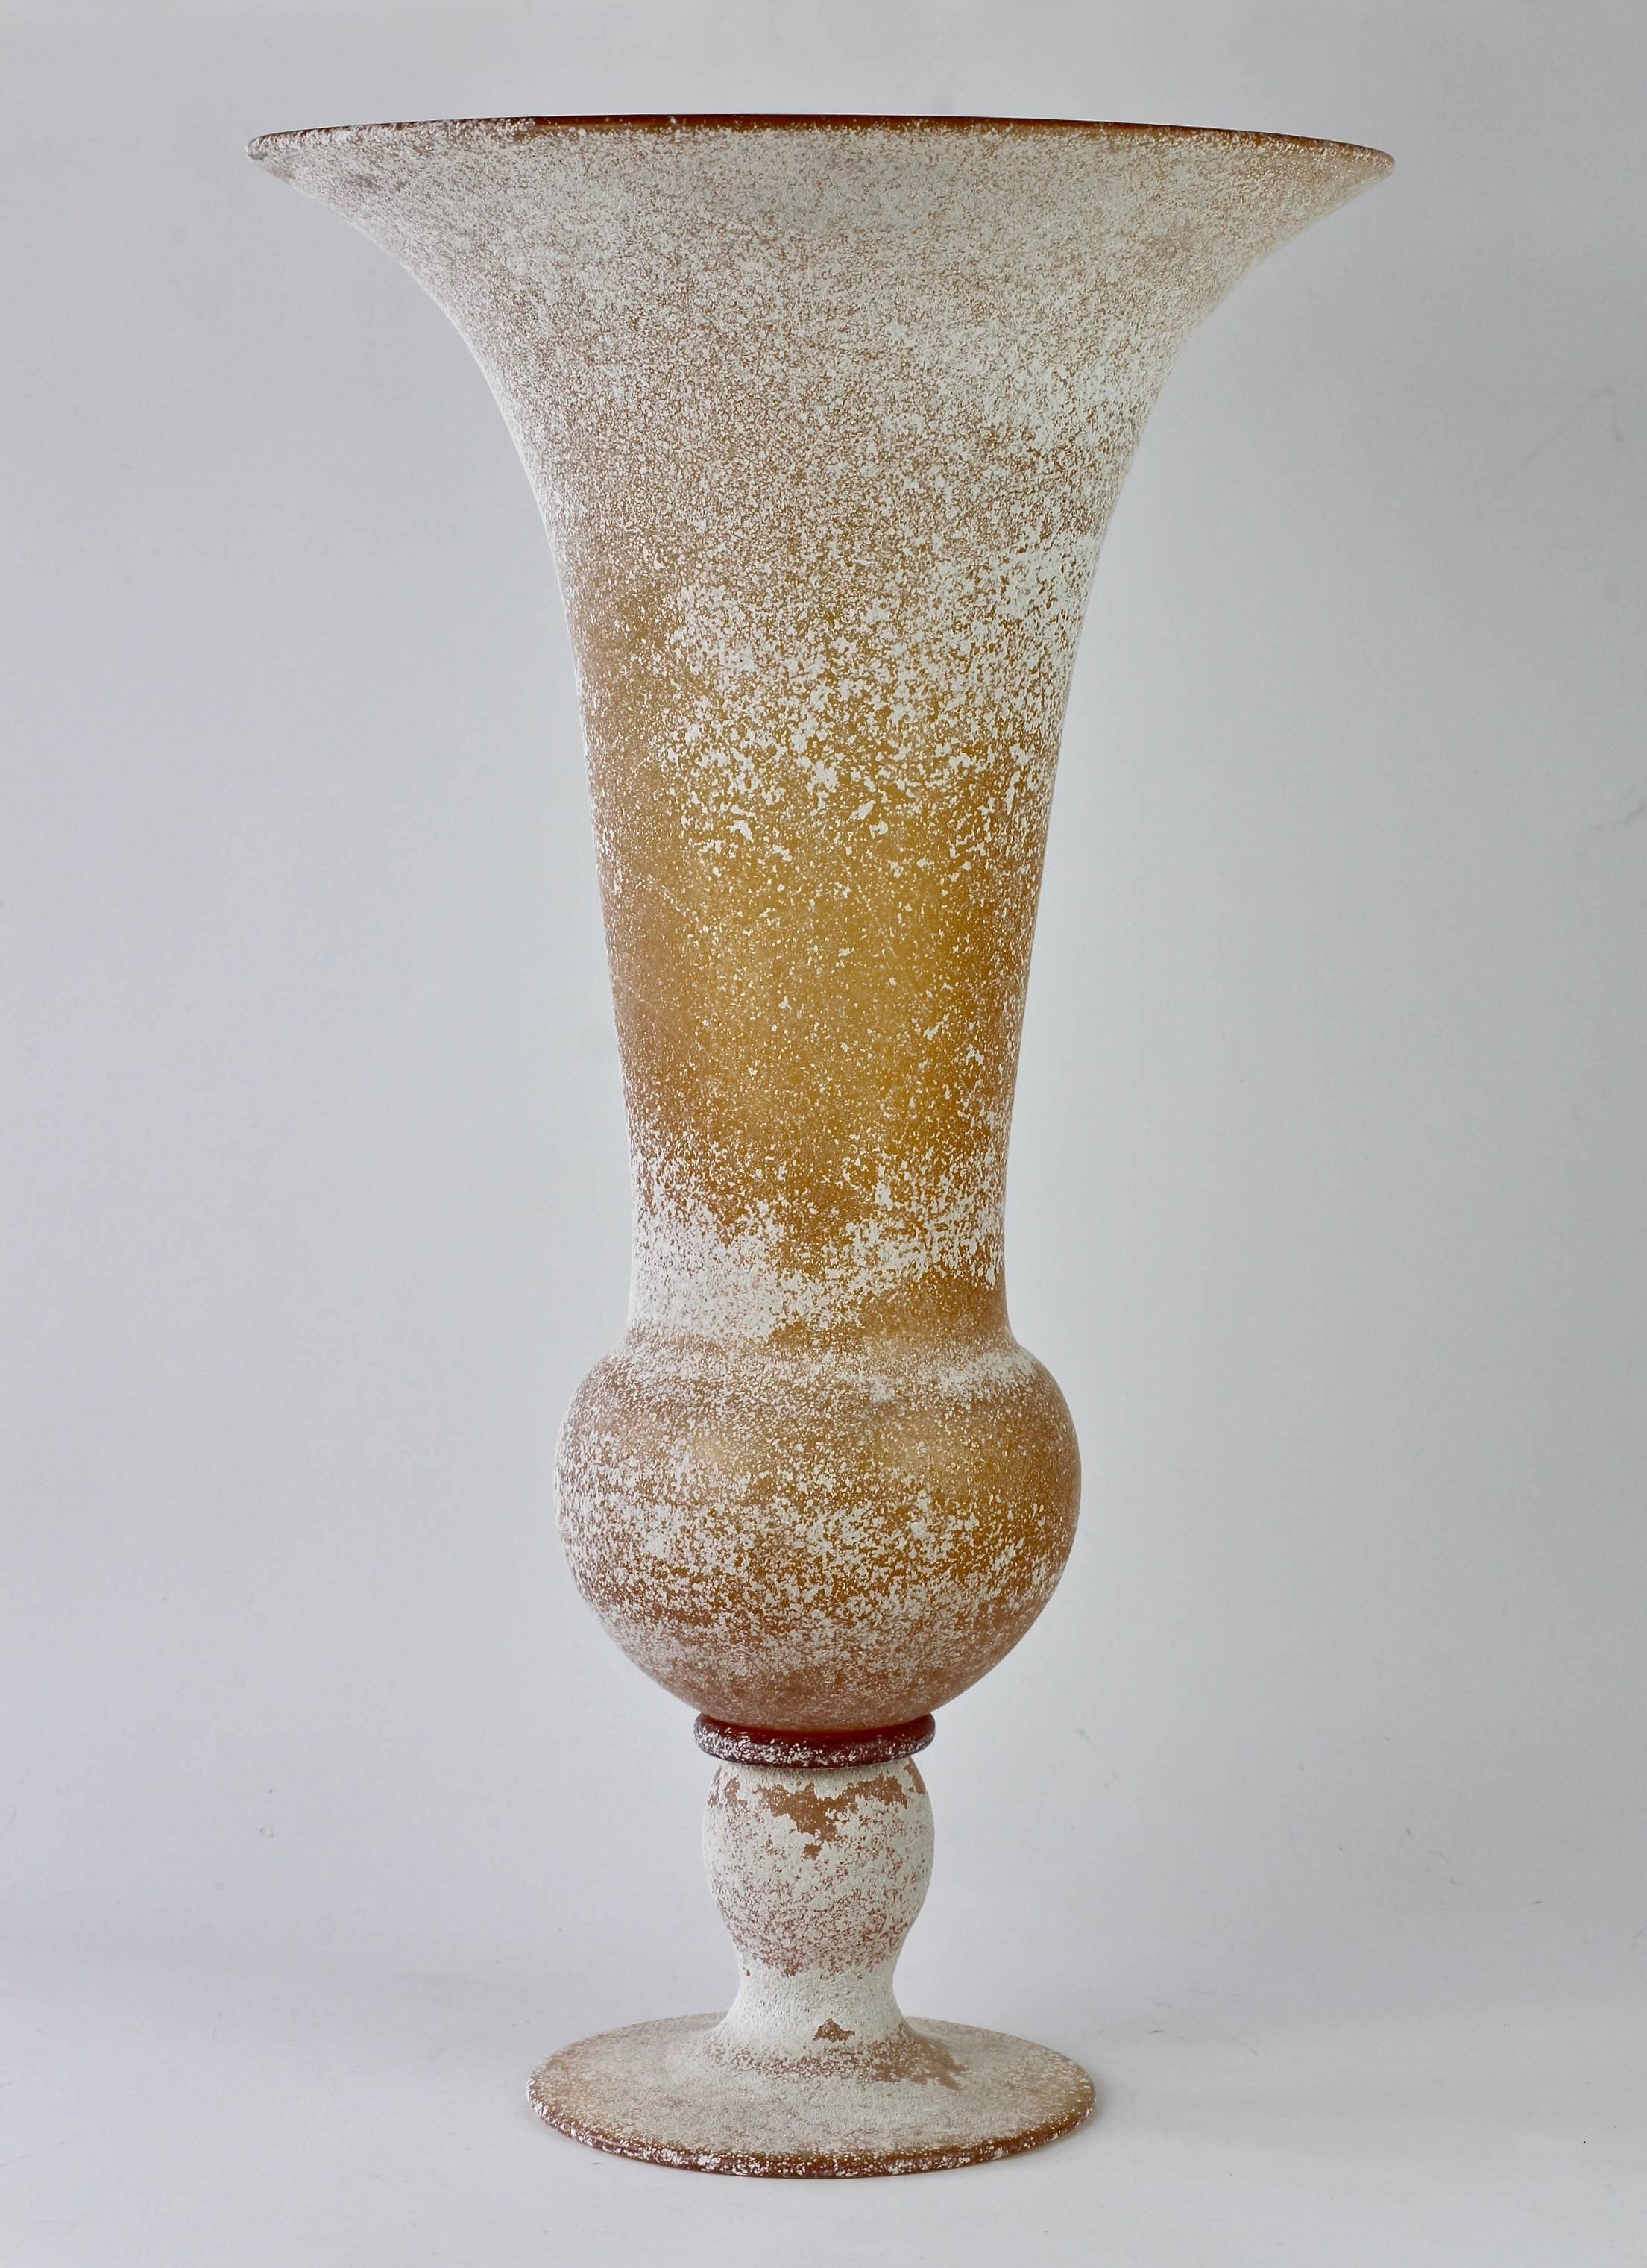 Monumental 20 inch tall 'a Scavo' amber colored / colored fluted glass vase by Seguso Vetri d'Arte Murano, Italy, circa 1960s. Elegant in form and showing extraordinary craftmanship with the use of the 'Scavo' technique. Above all, particularly